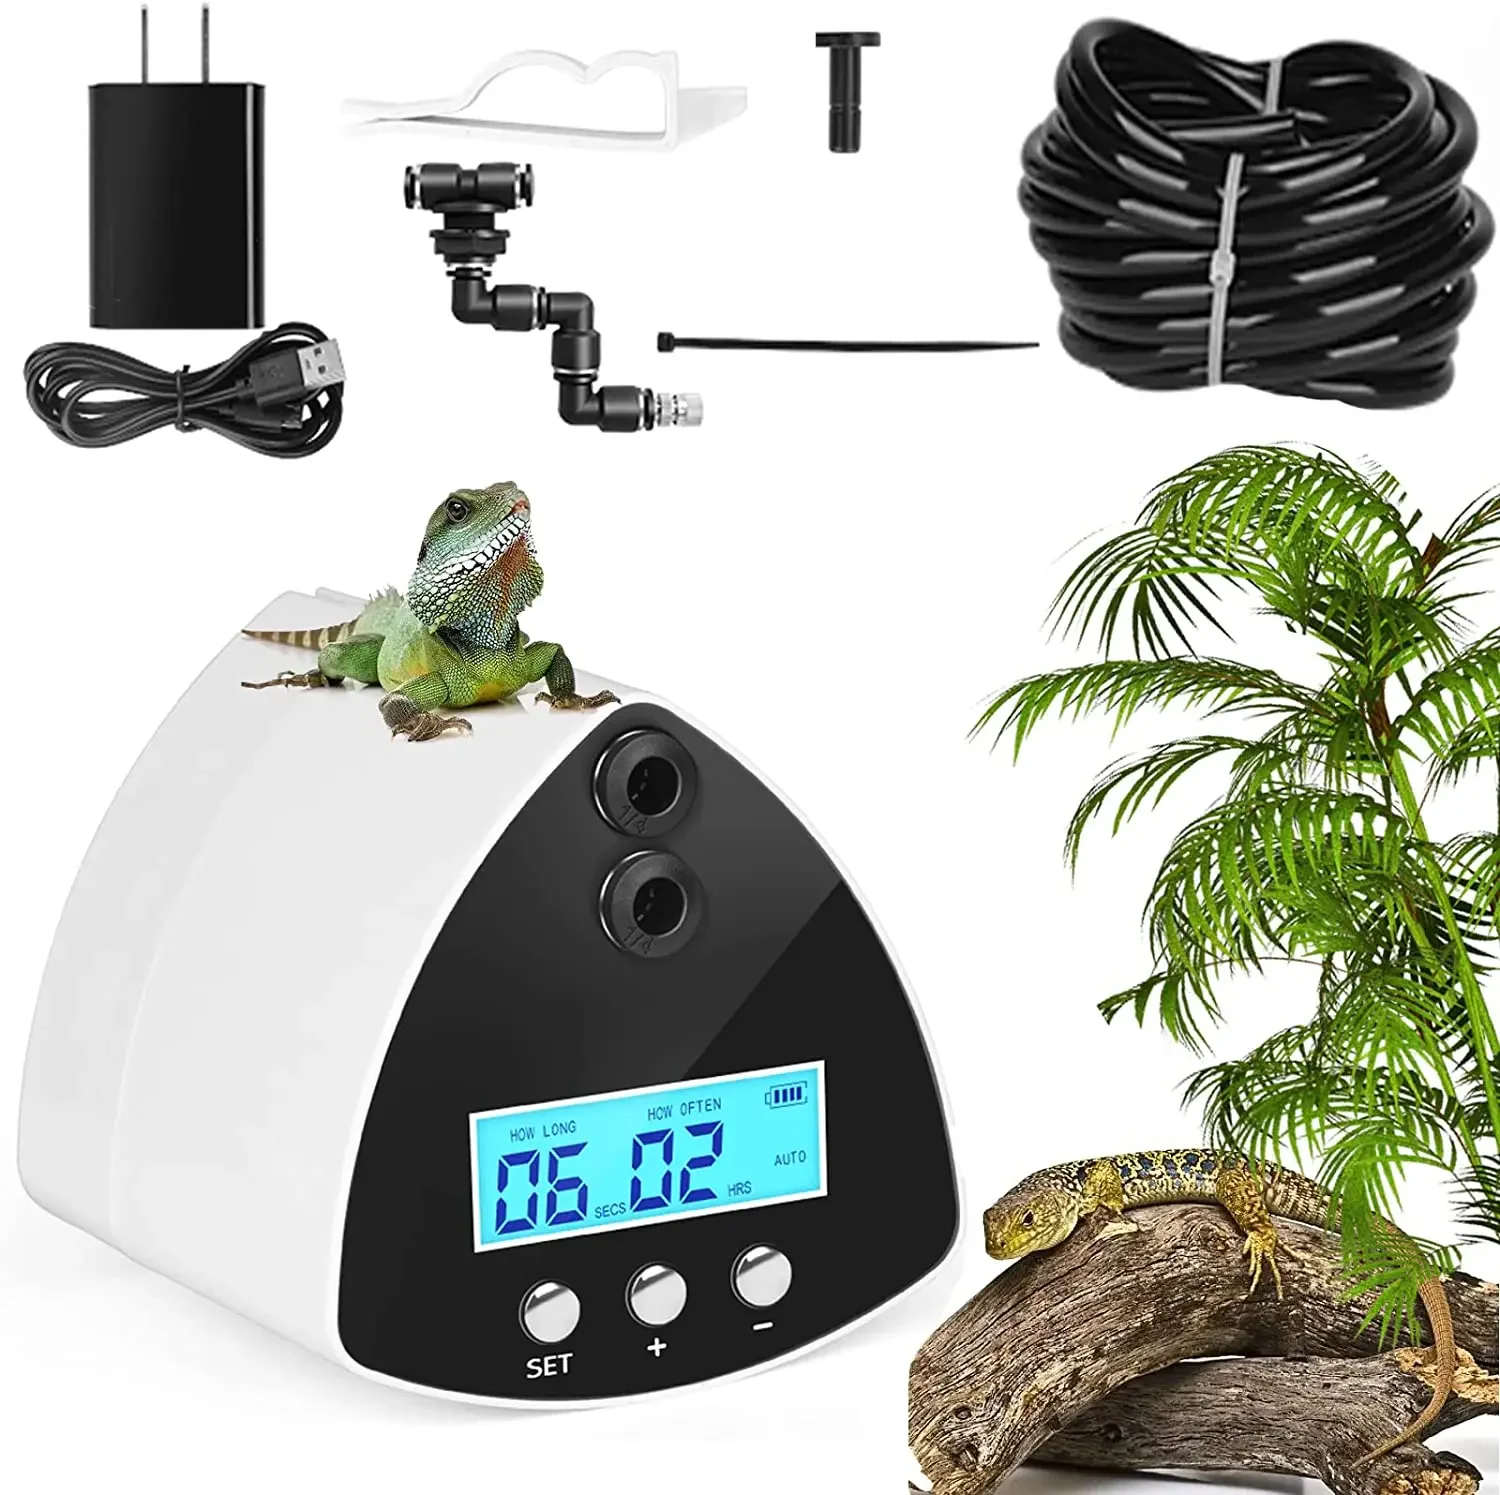 

Reptile Misting System Automatic Intelligent Reptile fogger terrariums Humidifiers Smart Timing Rainforest with Spray Nozzle